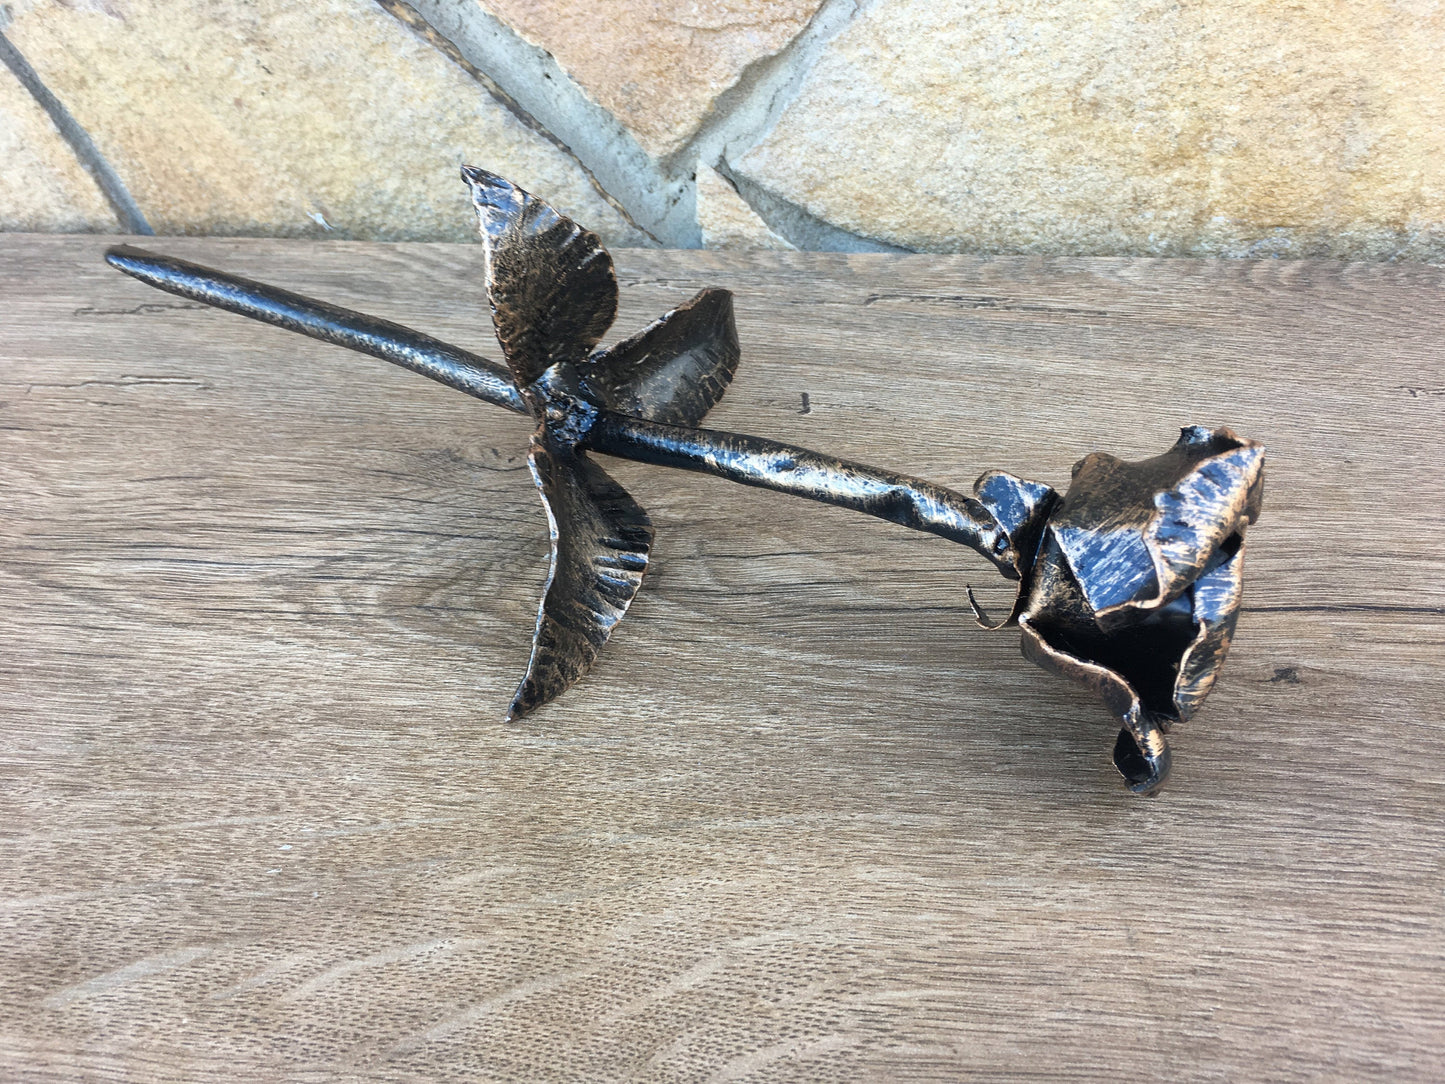 6th anniversary gift, 6 year anniversary, iron anniversary, metal rose, metal sculpture, iron rose, wrought iron rose,forged rose, steampunk